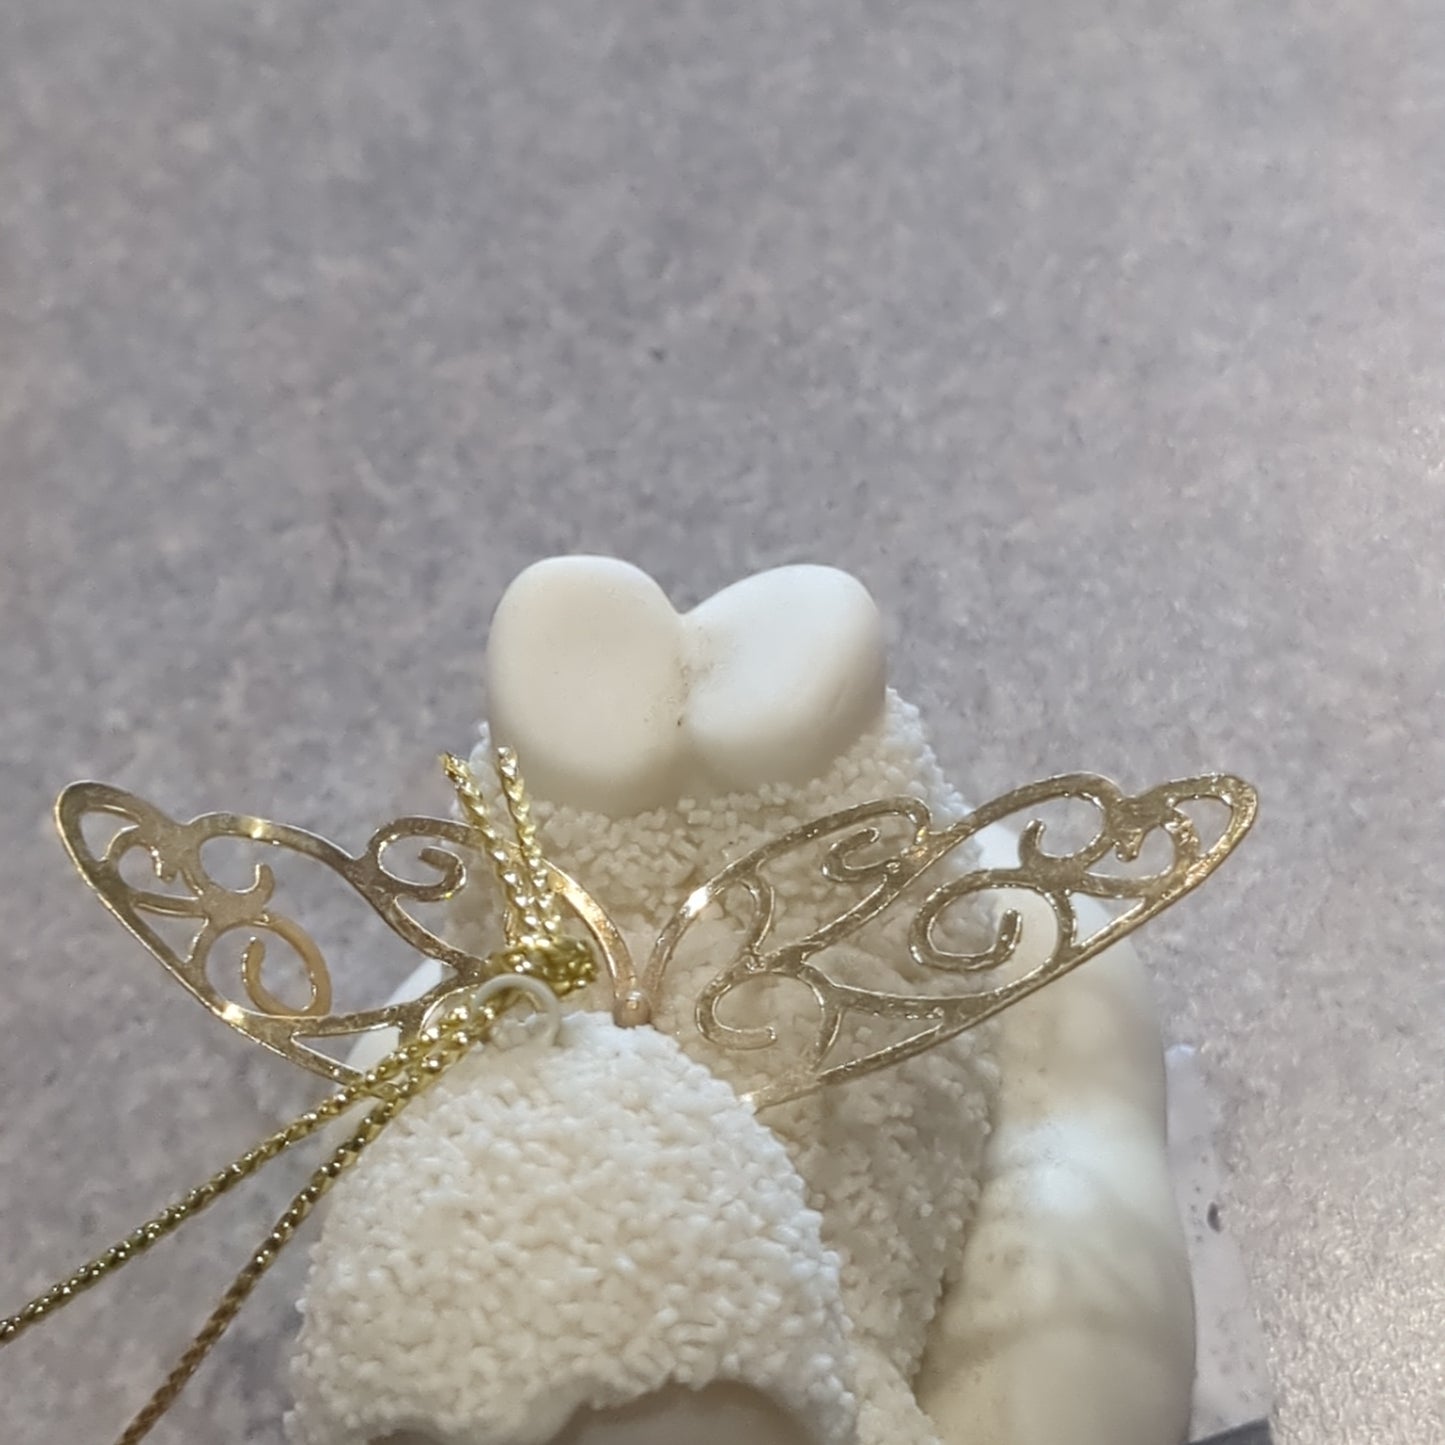 Department 56 snowbabies angel ornament laying down